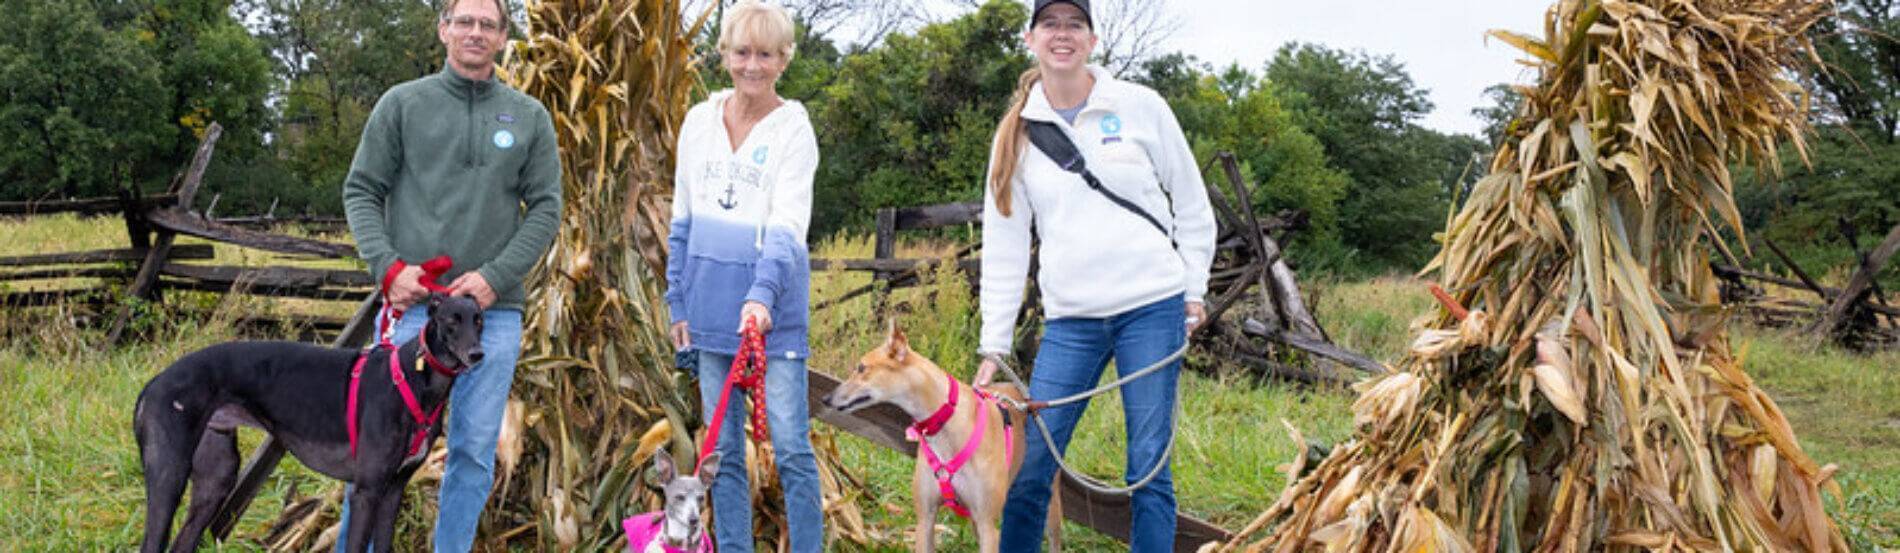 dogs and owners visiting farm sites